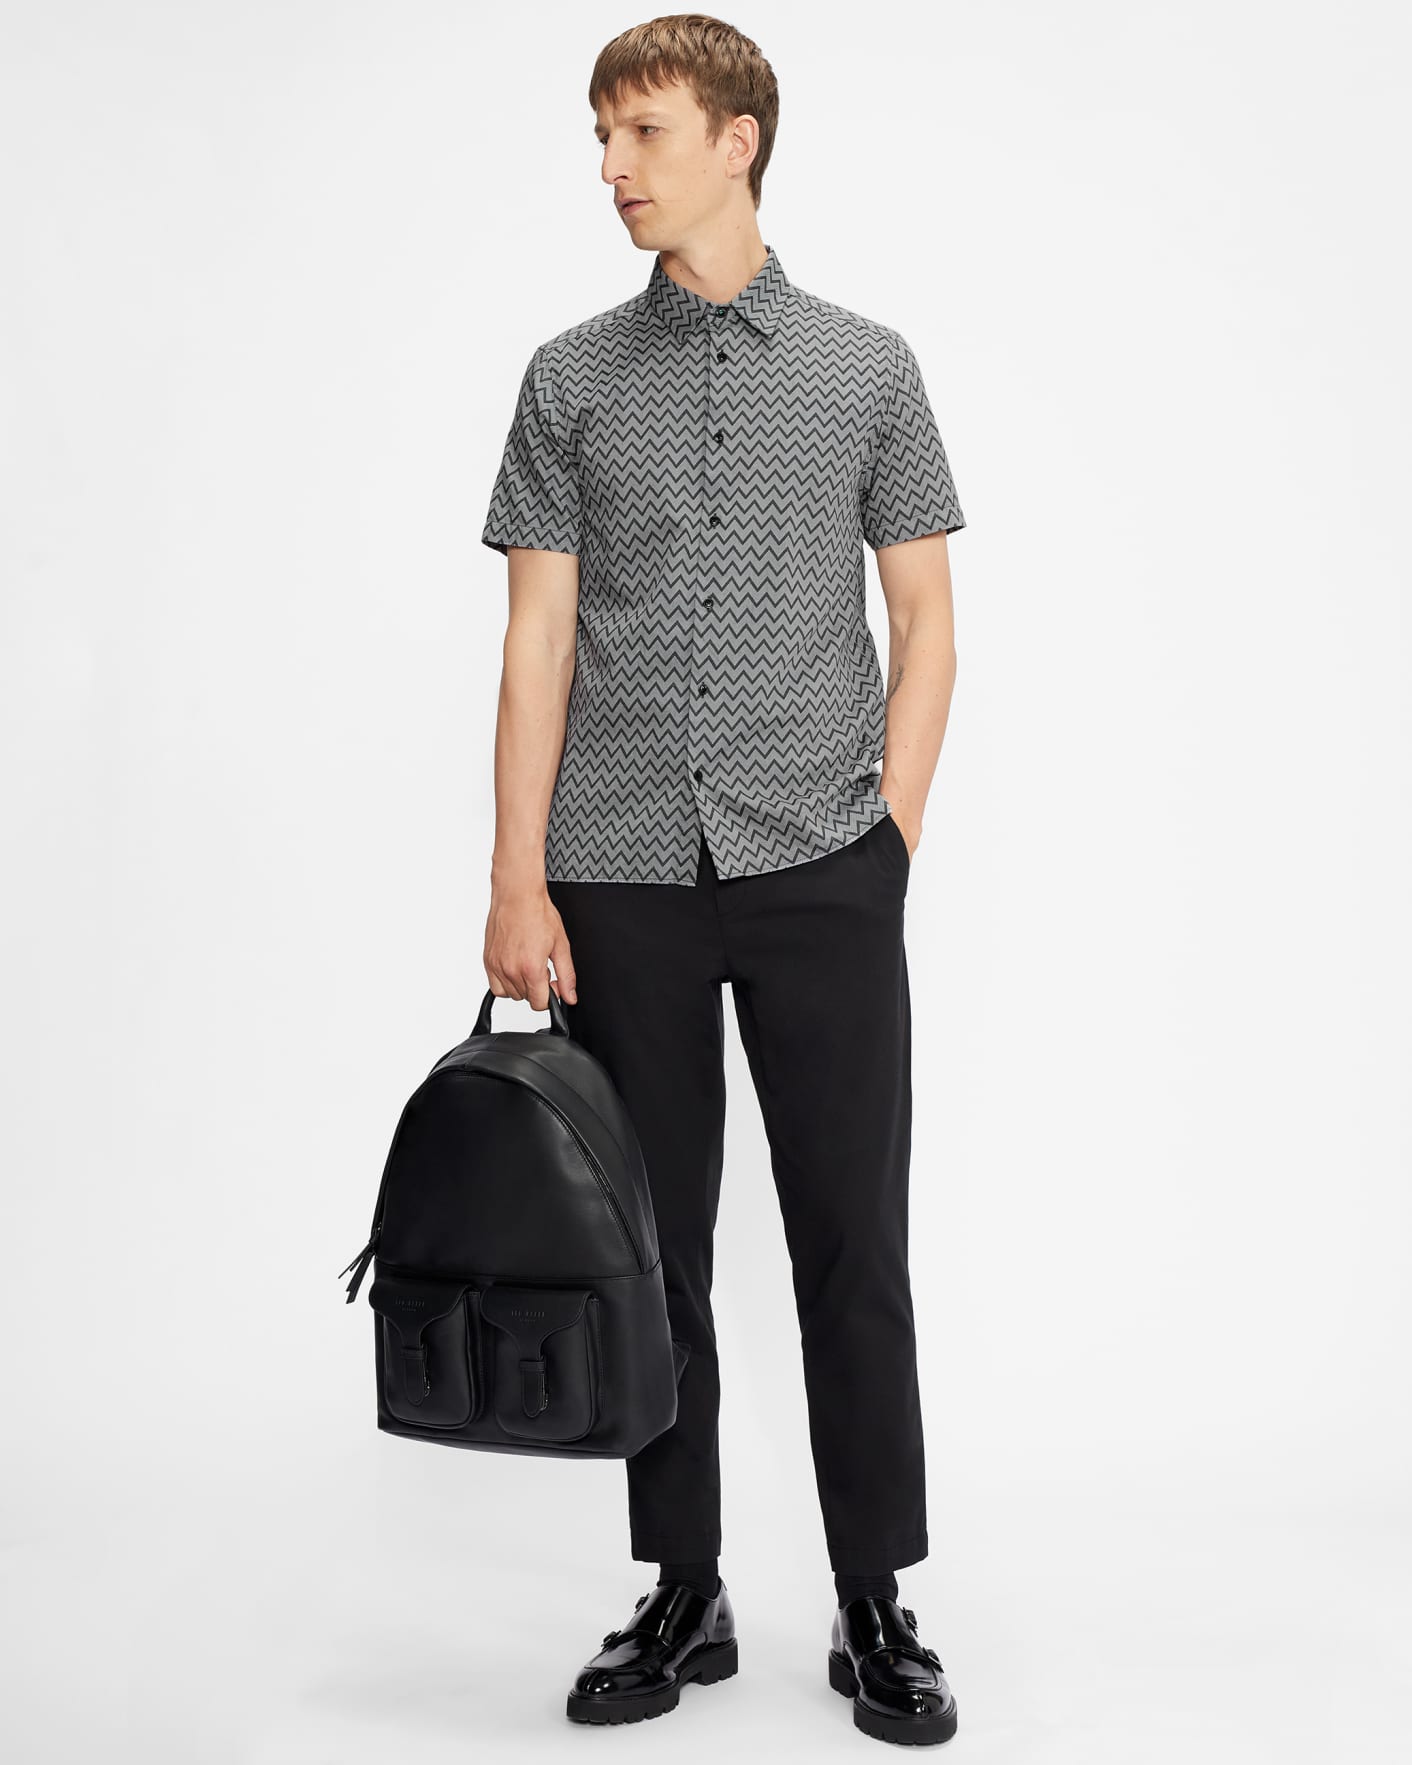 Black SS Contemporary Zigzag Monochrome Shirt Ted Baker